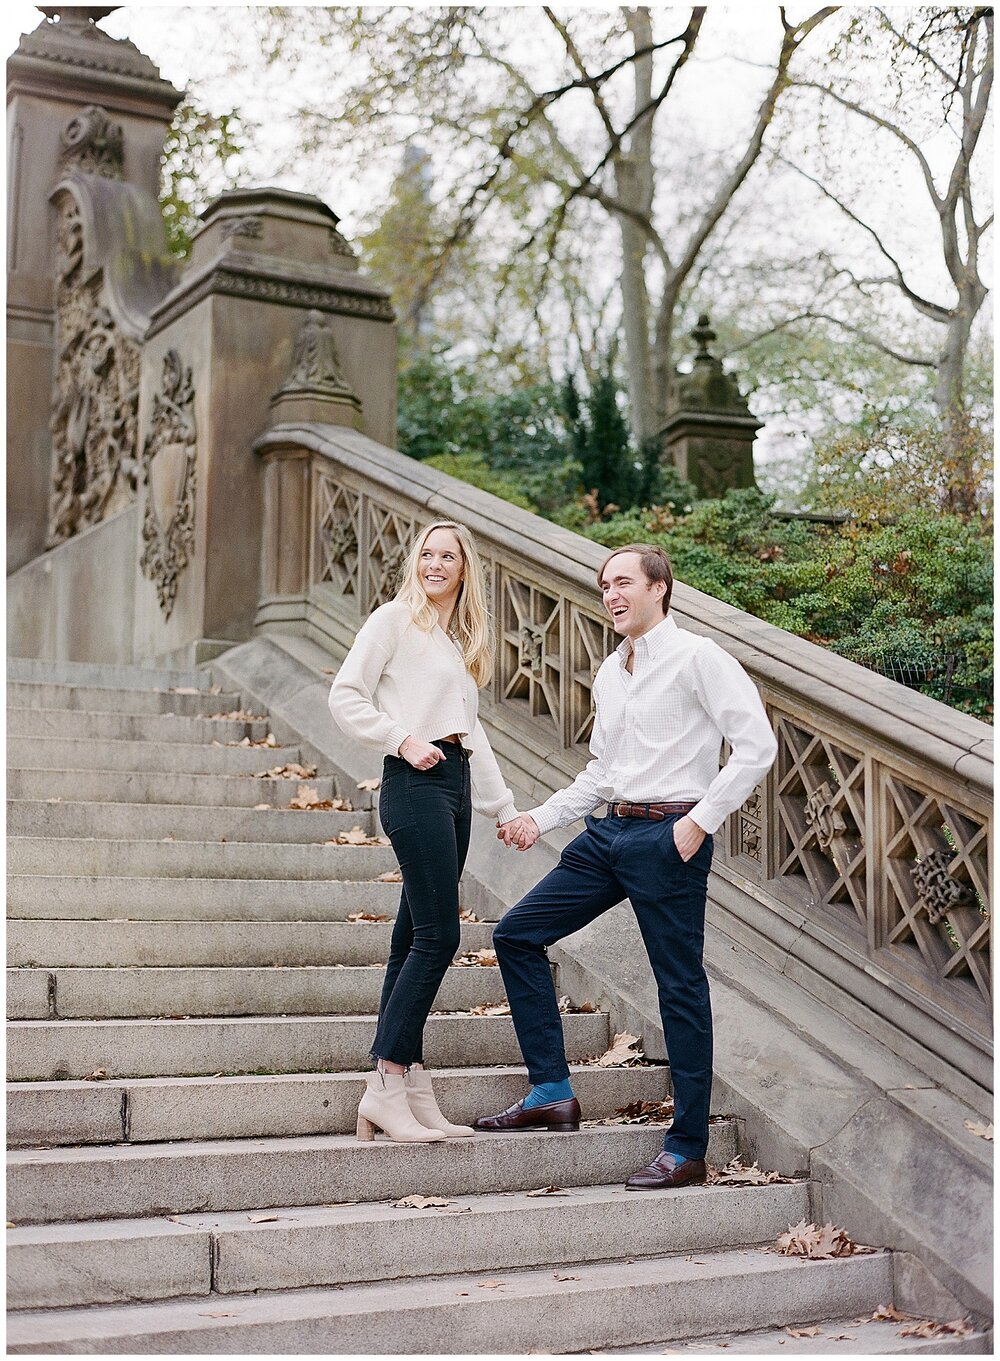  engagement photo session at bethesda terrace in central park 